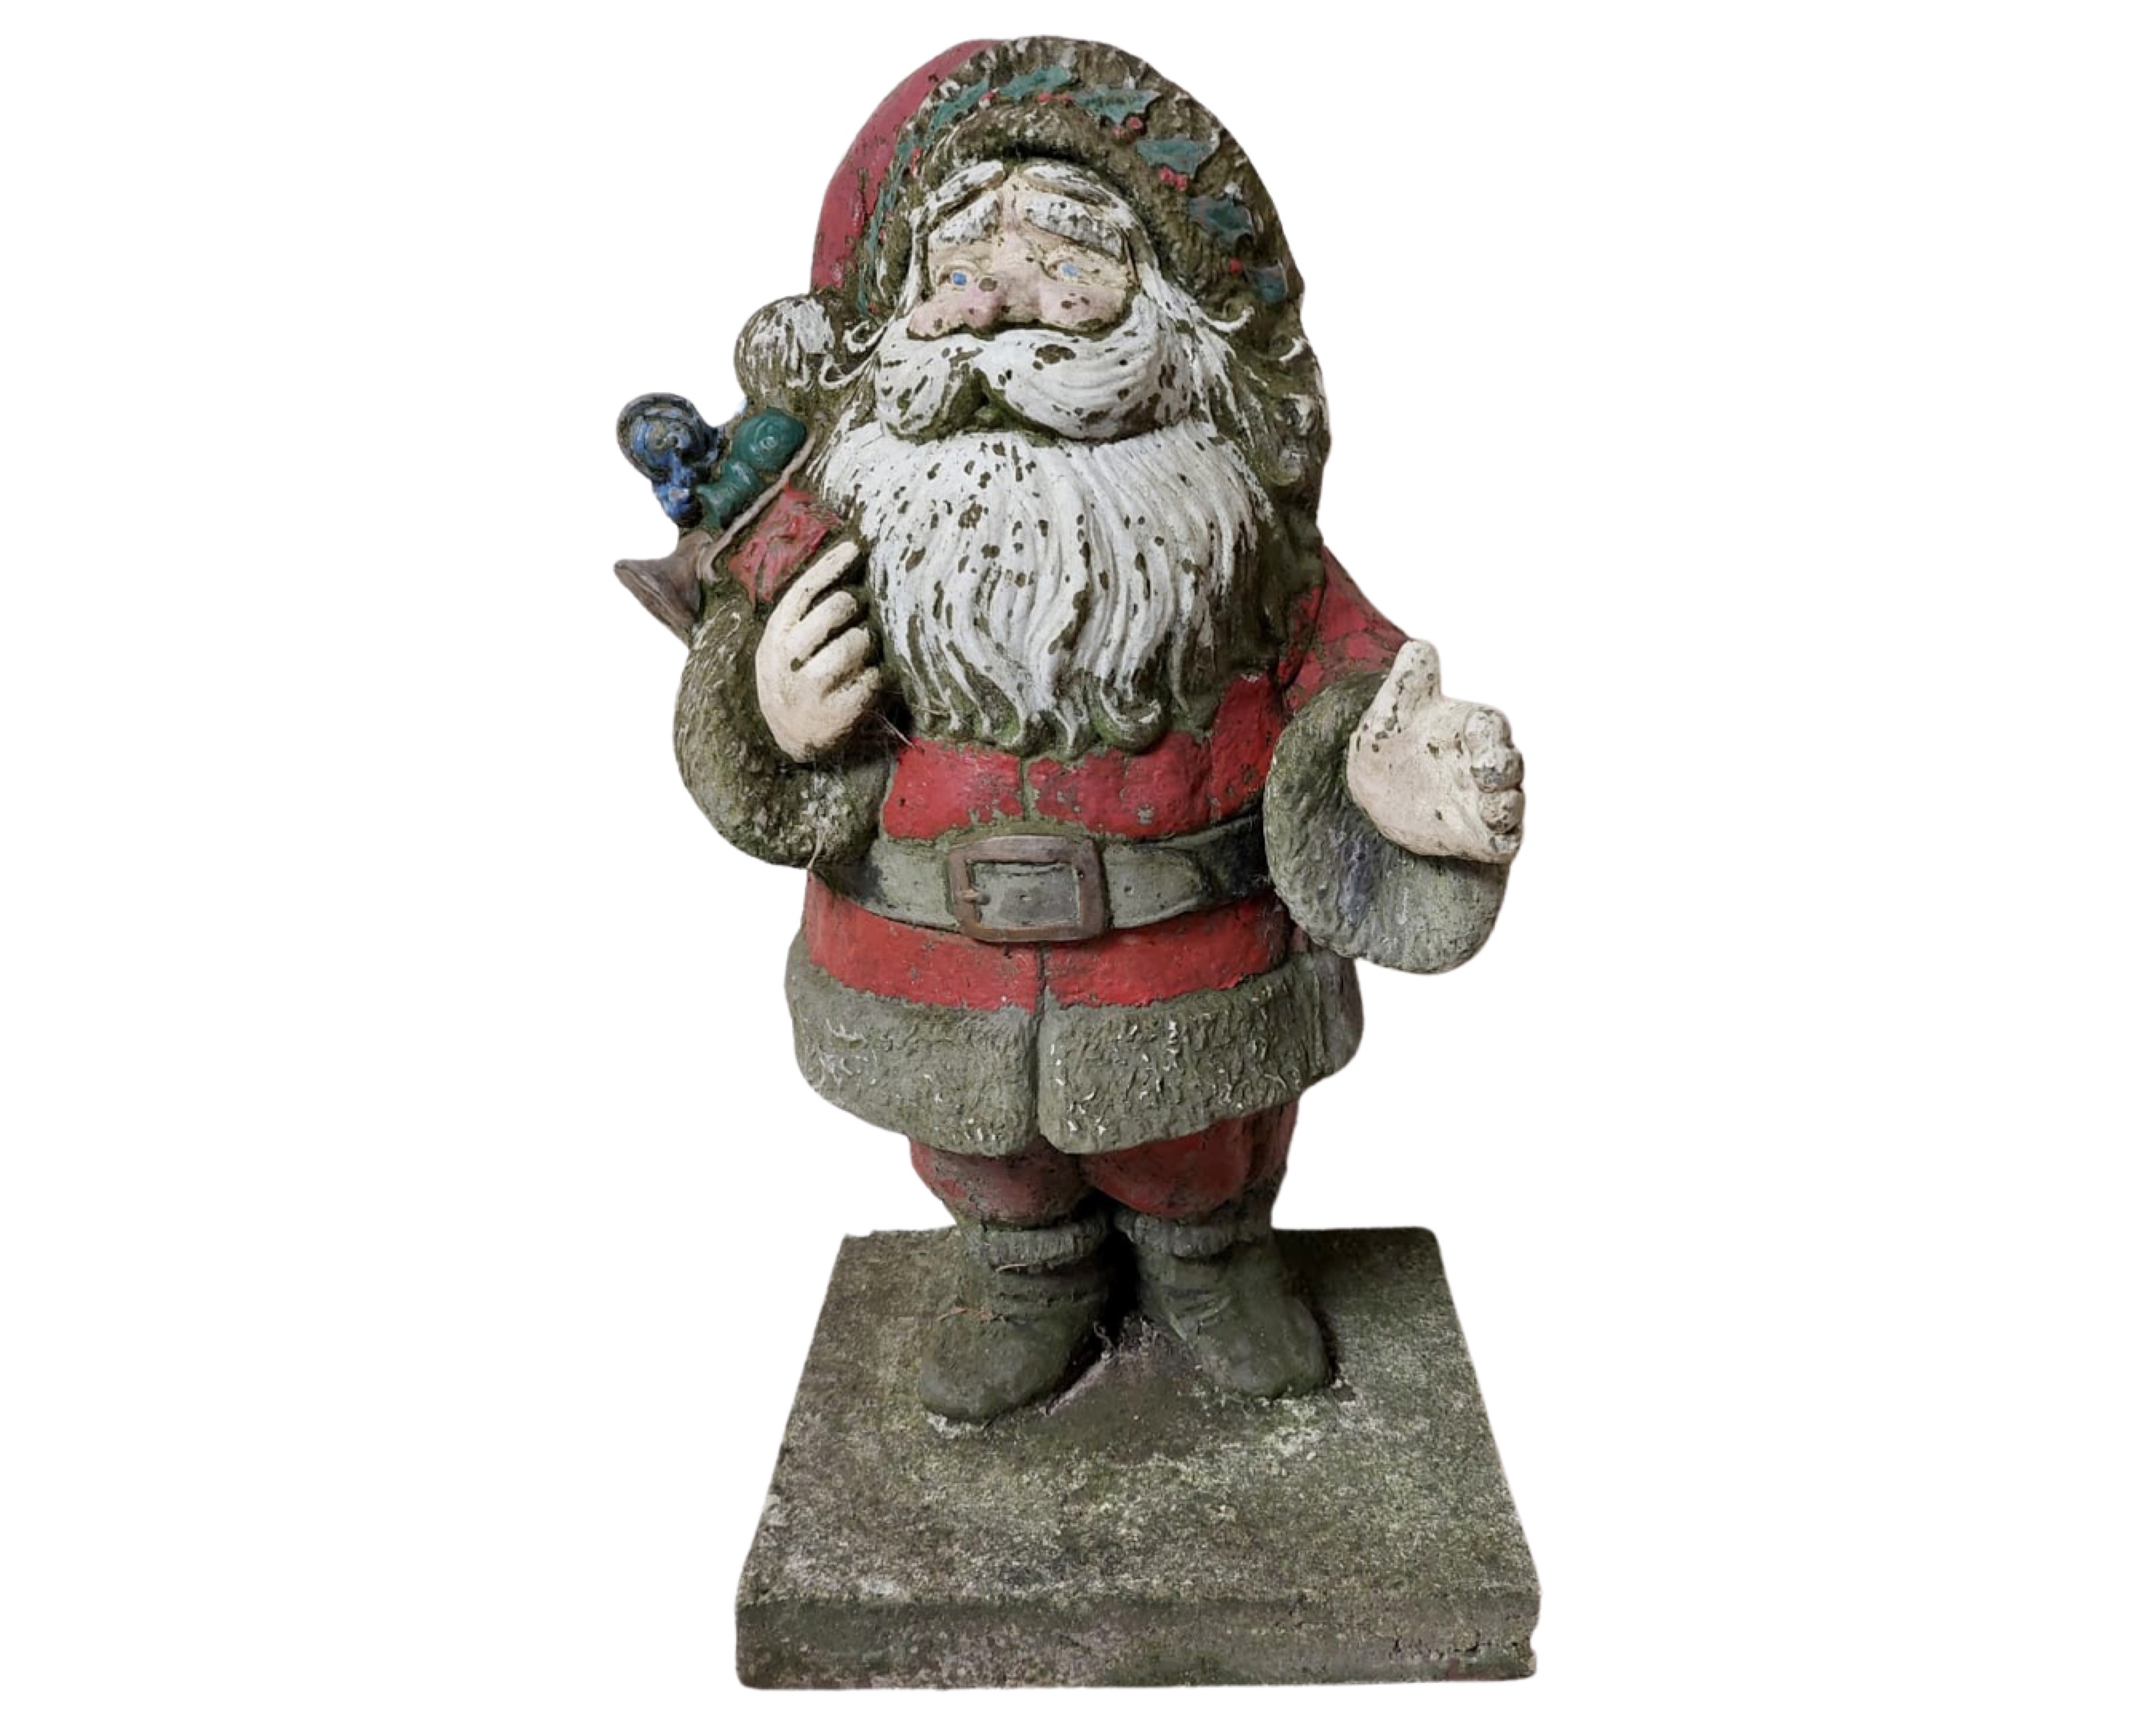 A weathered concrete figure of Santa Claus,